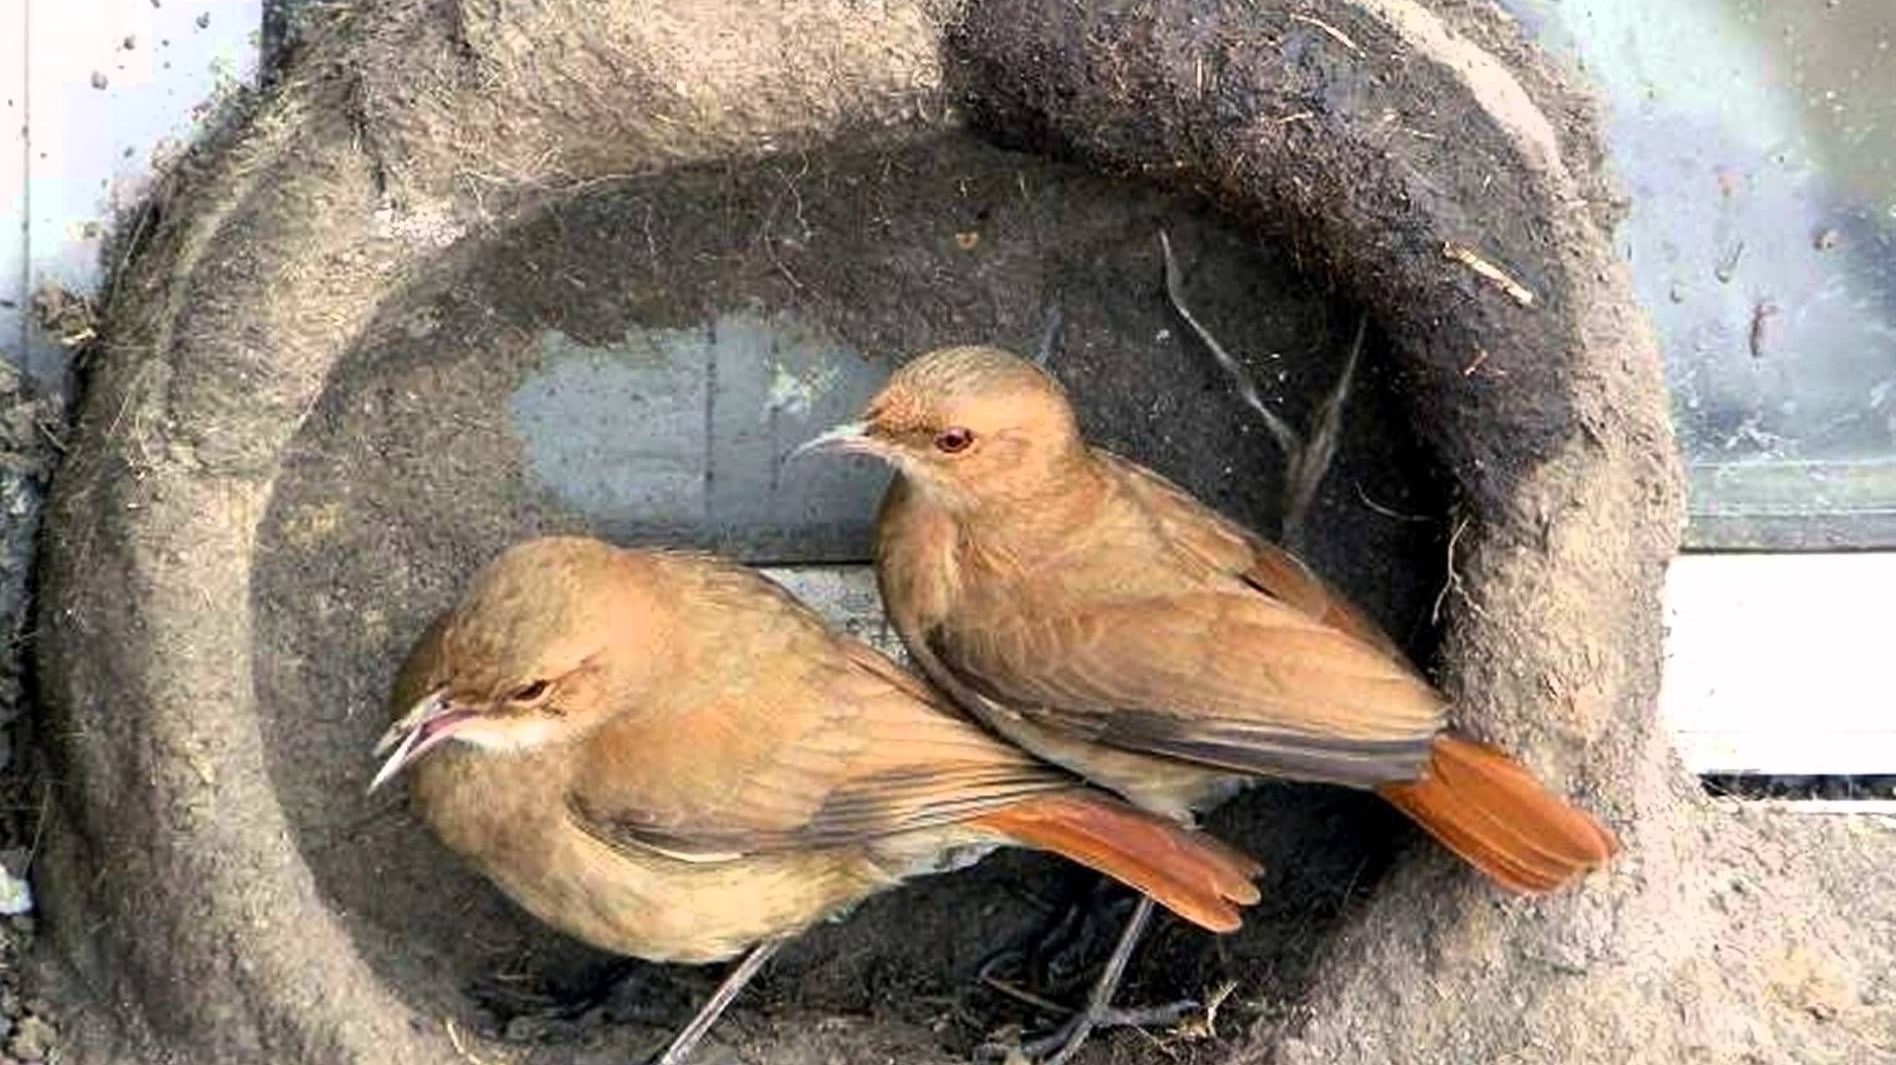 Males and females participate equally in nest building.